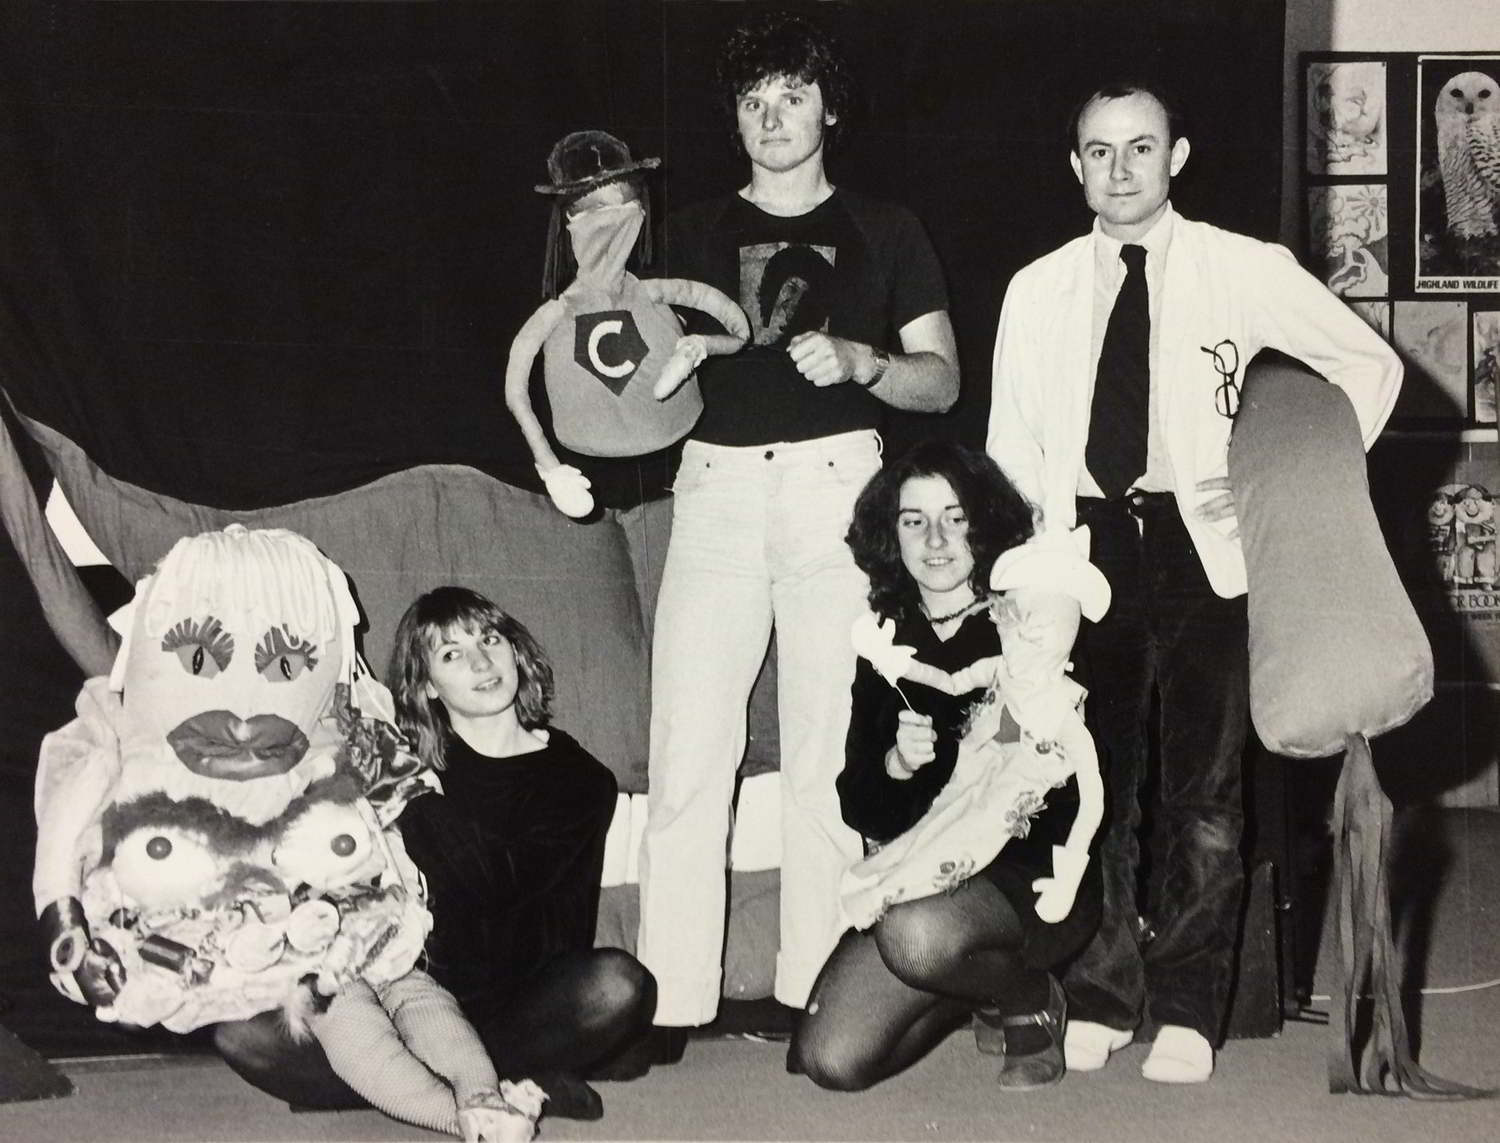 Handspan Theatre The Mouth Show cast holding puppets Bristle, Sugar, Crunch and the big carrot